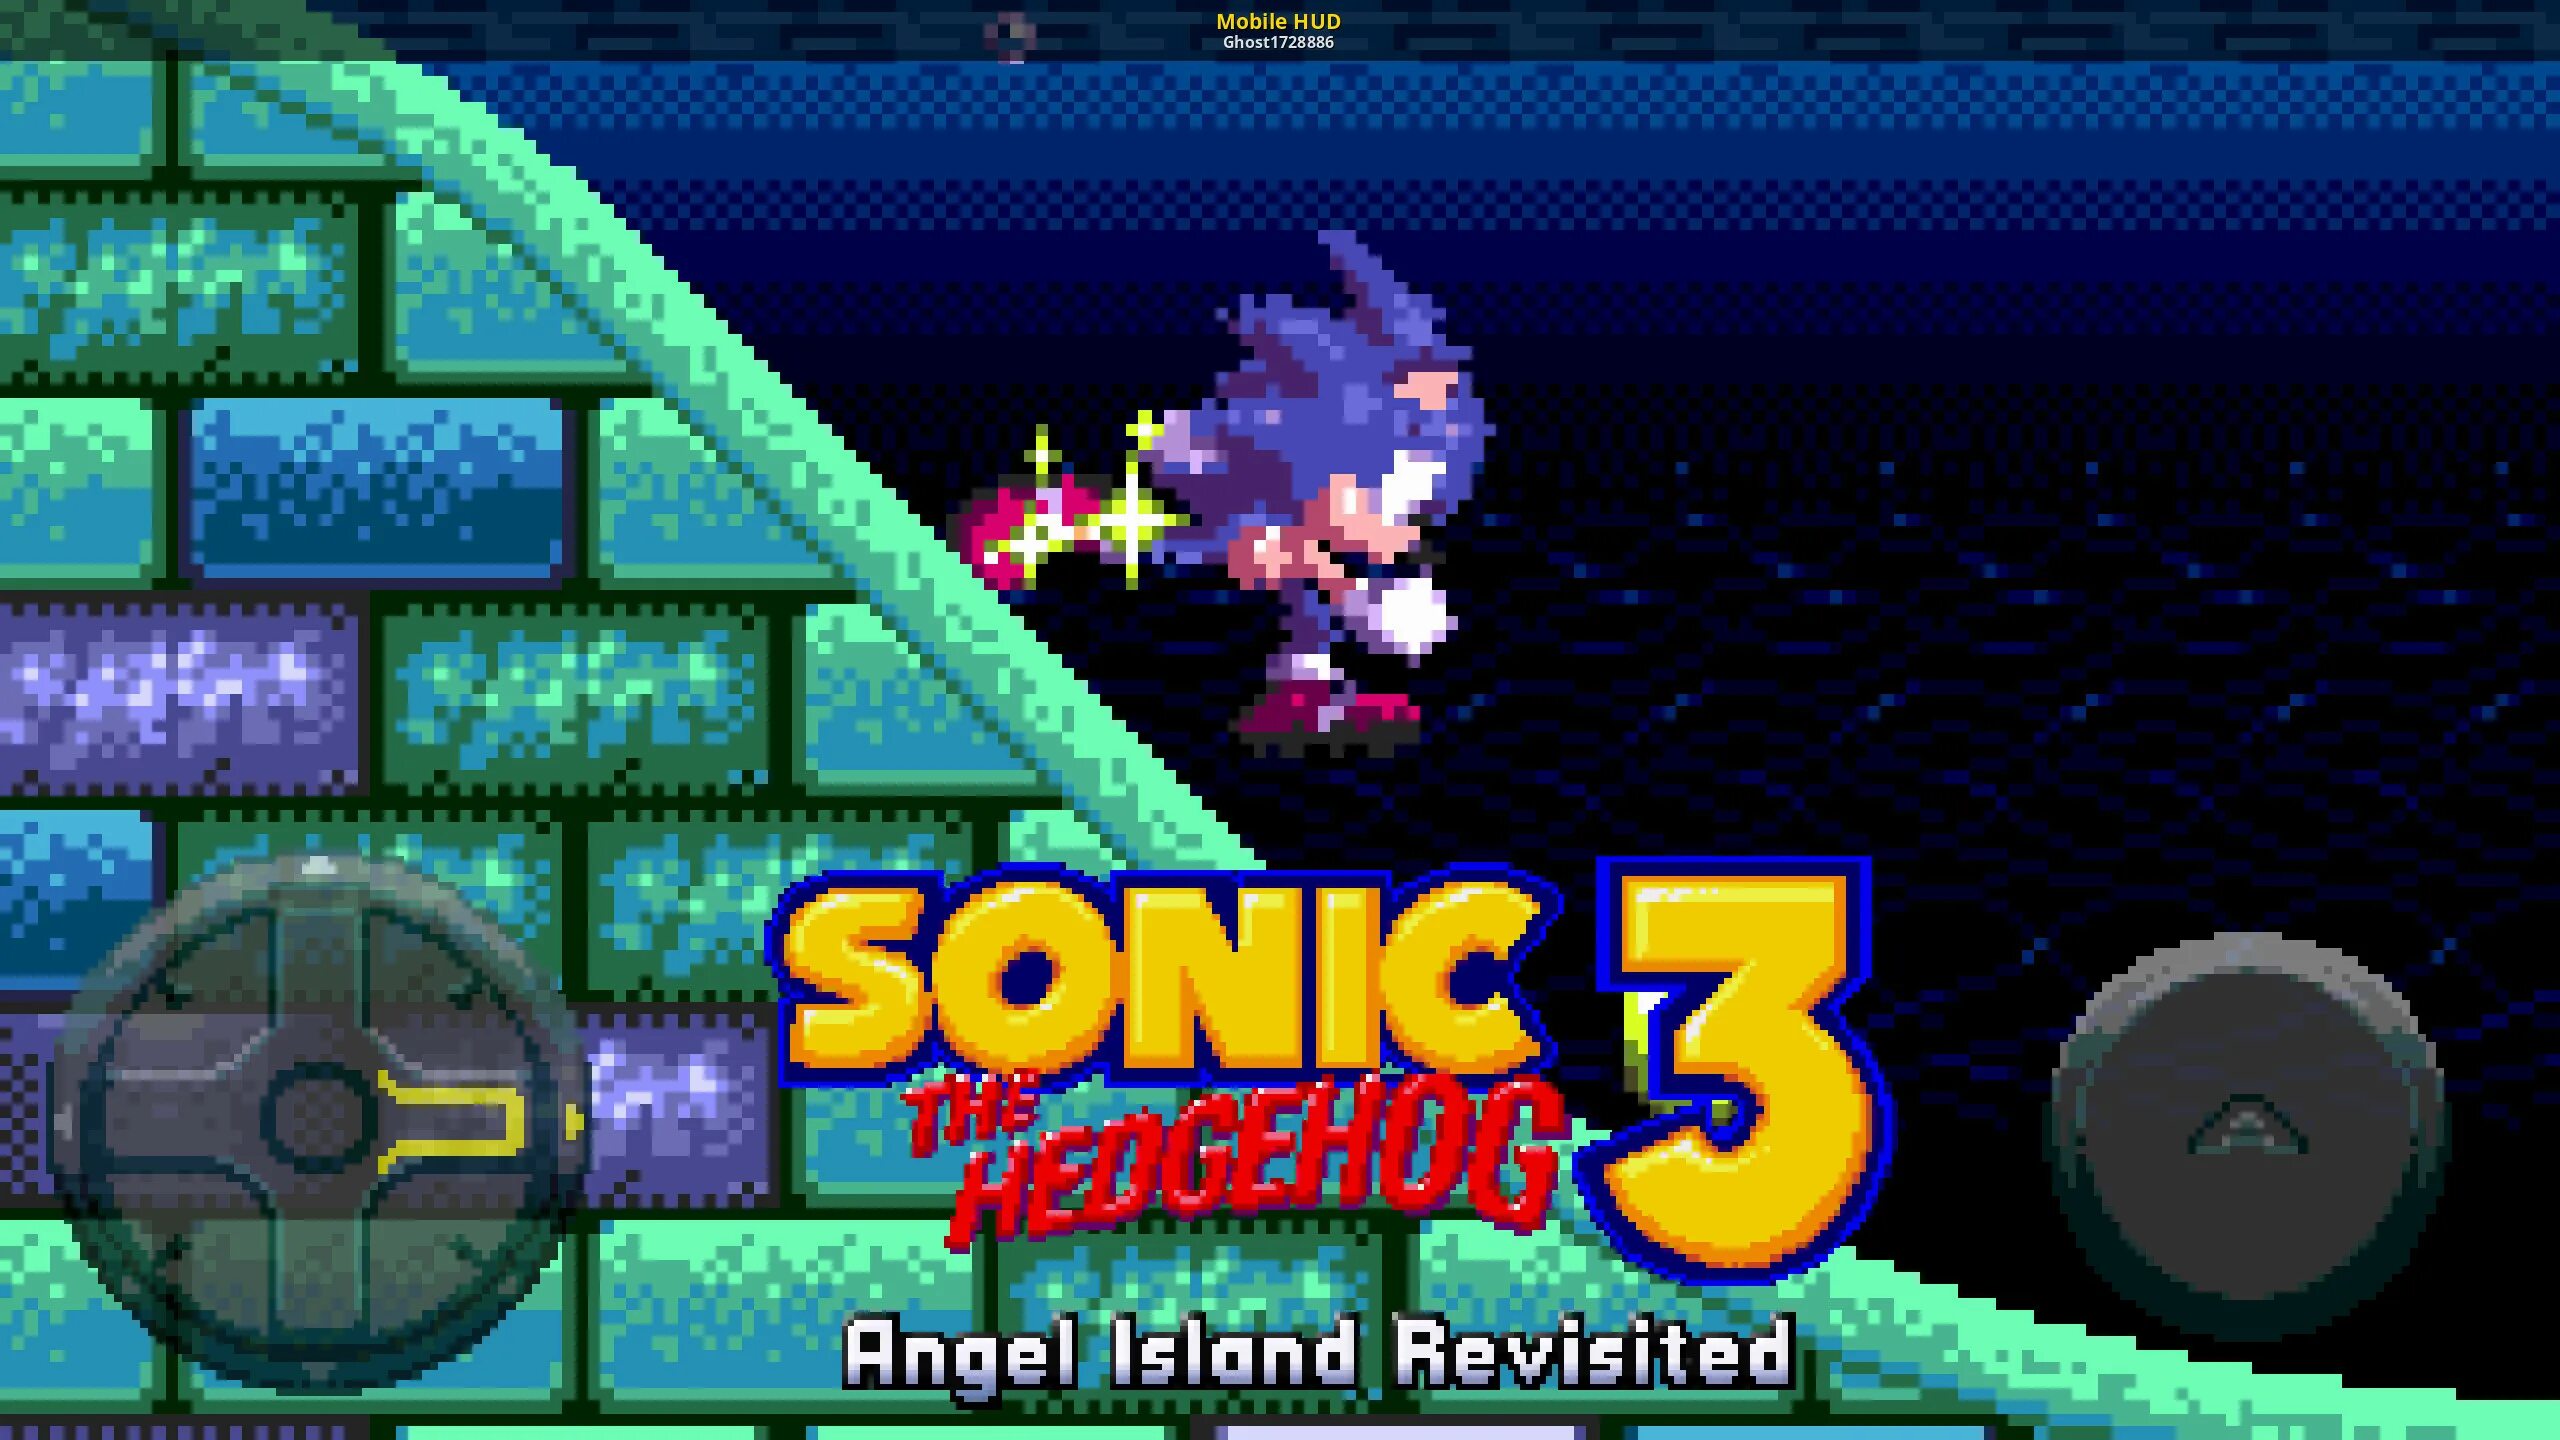 Sonic 3 mobile. Sonic 3 Air HUD. Sonic 3 Air manual. Sonic 3 a.i.r Android. Sonic 3 Air Mania.